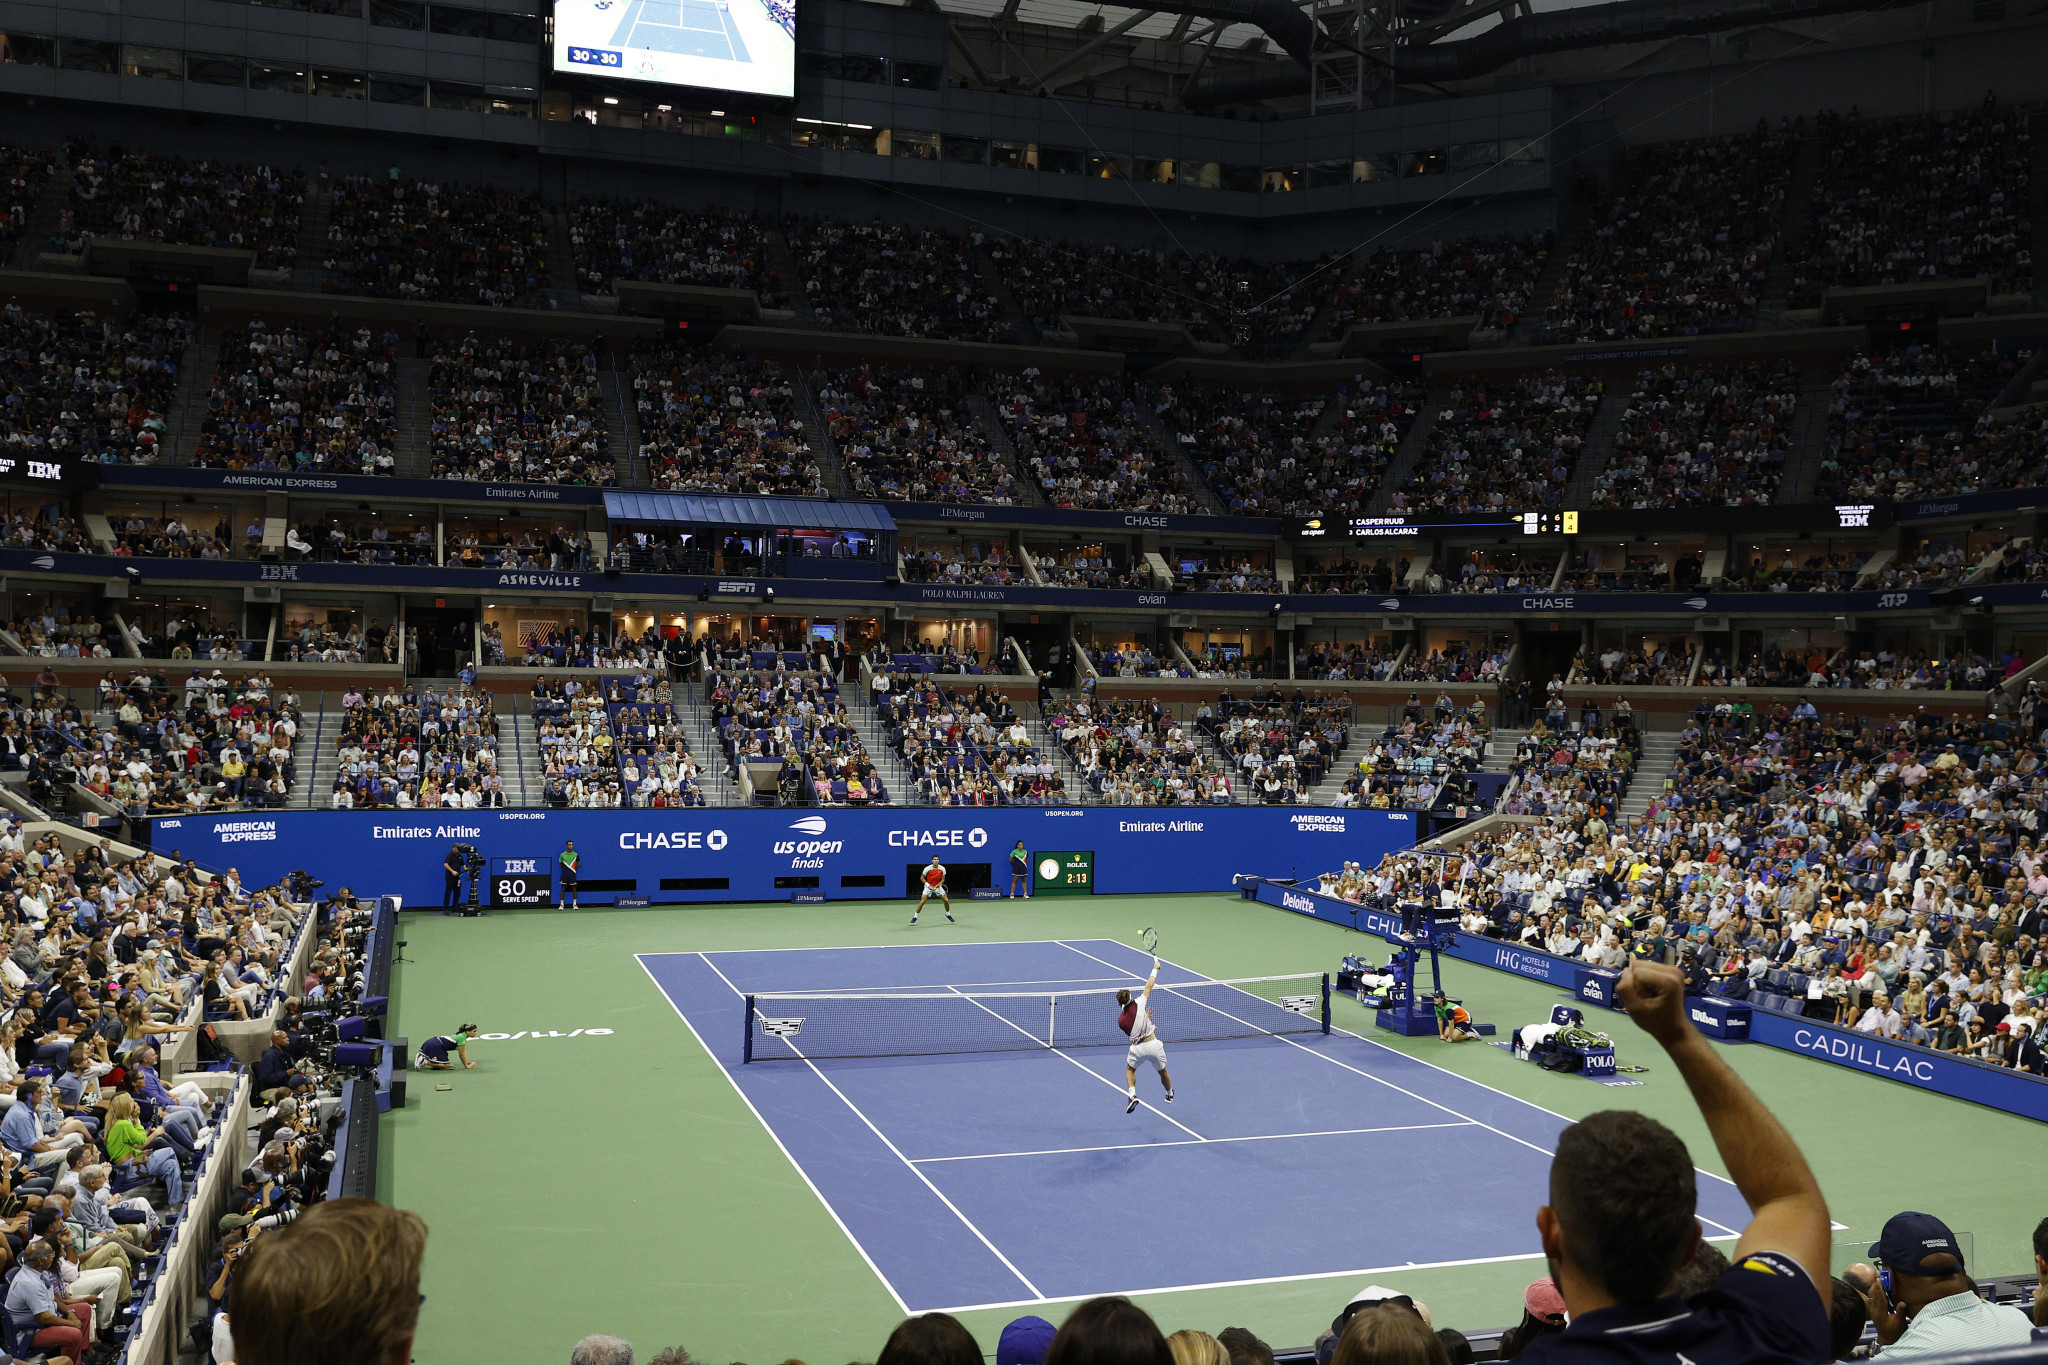 Alcaraz and Ruud served up a thrilling men's singles final in front of a packed Arthur Ashe Stadium ©Getty Images